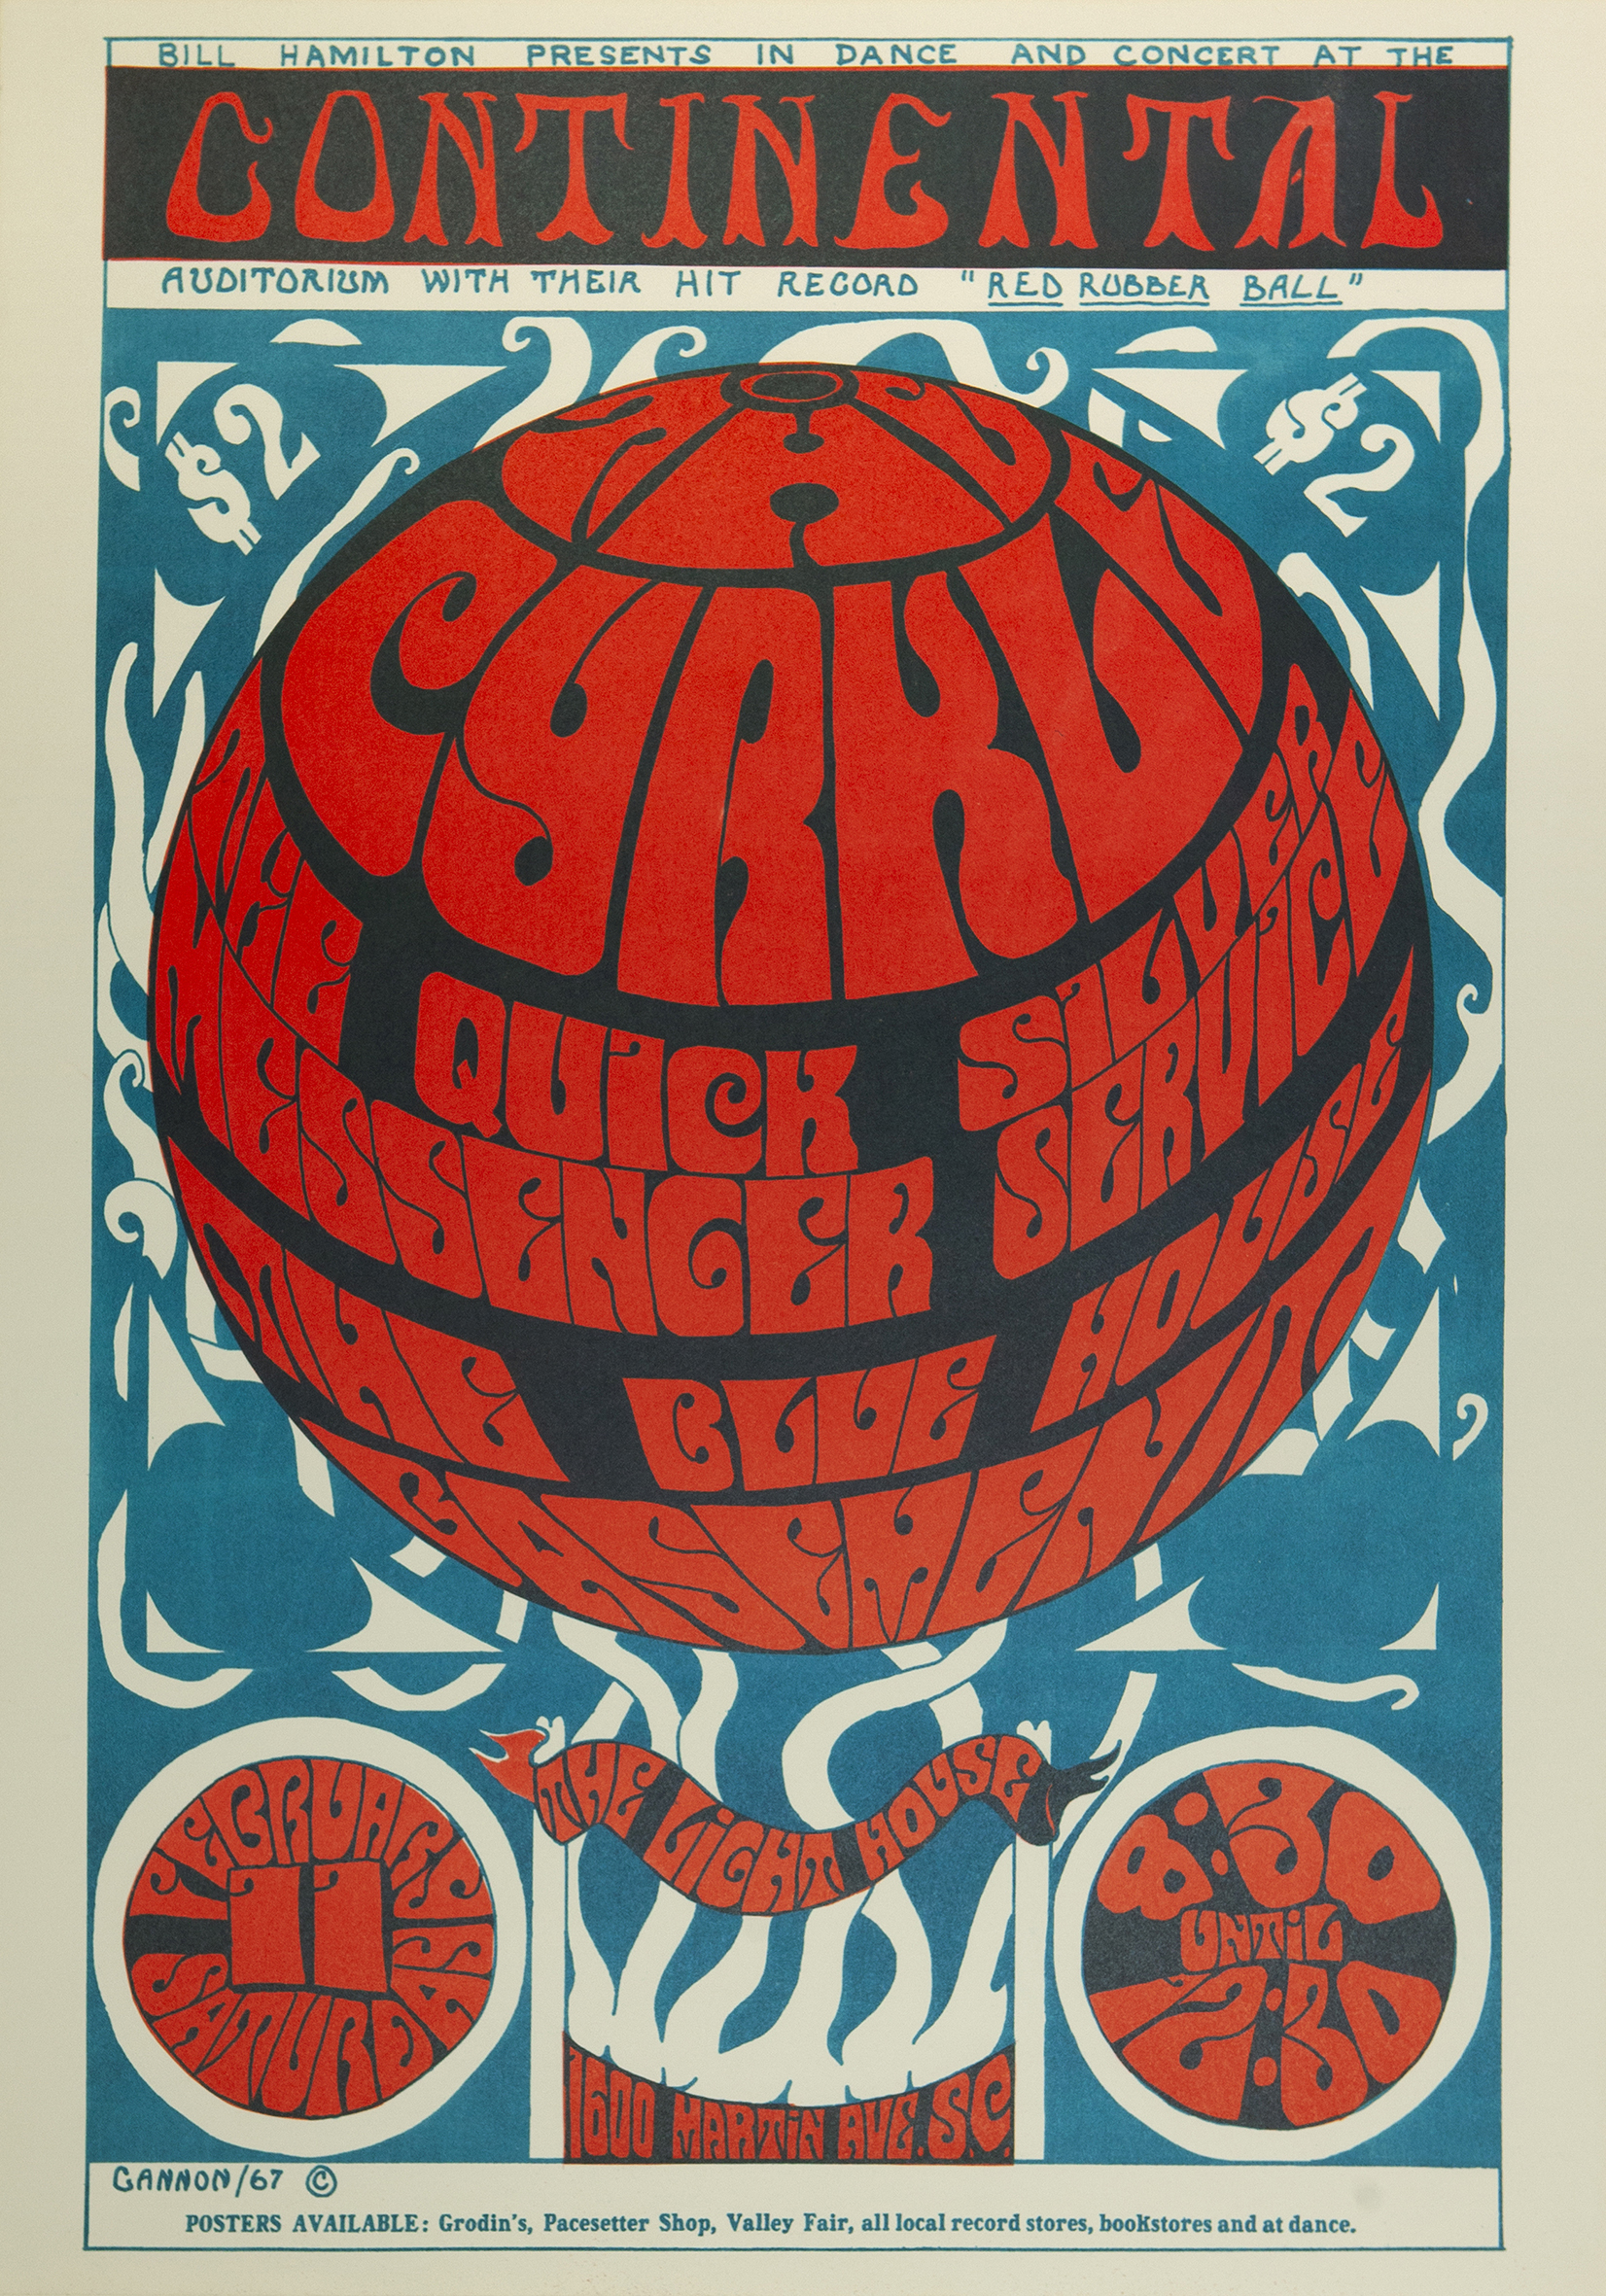 THE CYRKLE/THE QUICKSILVER MESSENGER SERVICE/THE BASEMENT/BLUE HOUSE at the